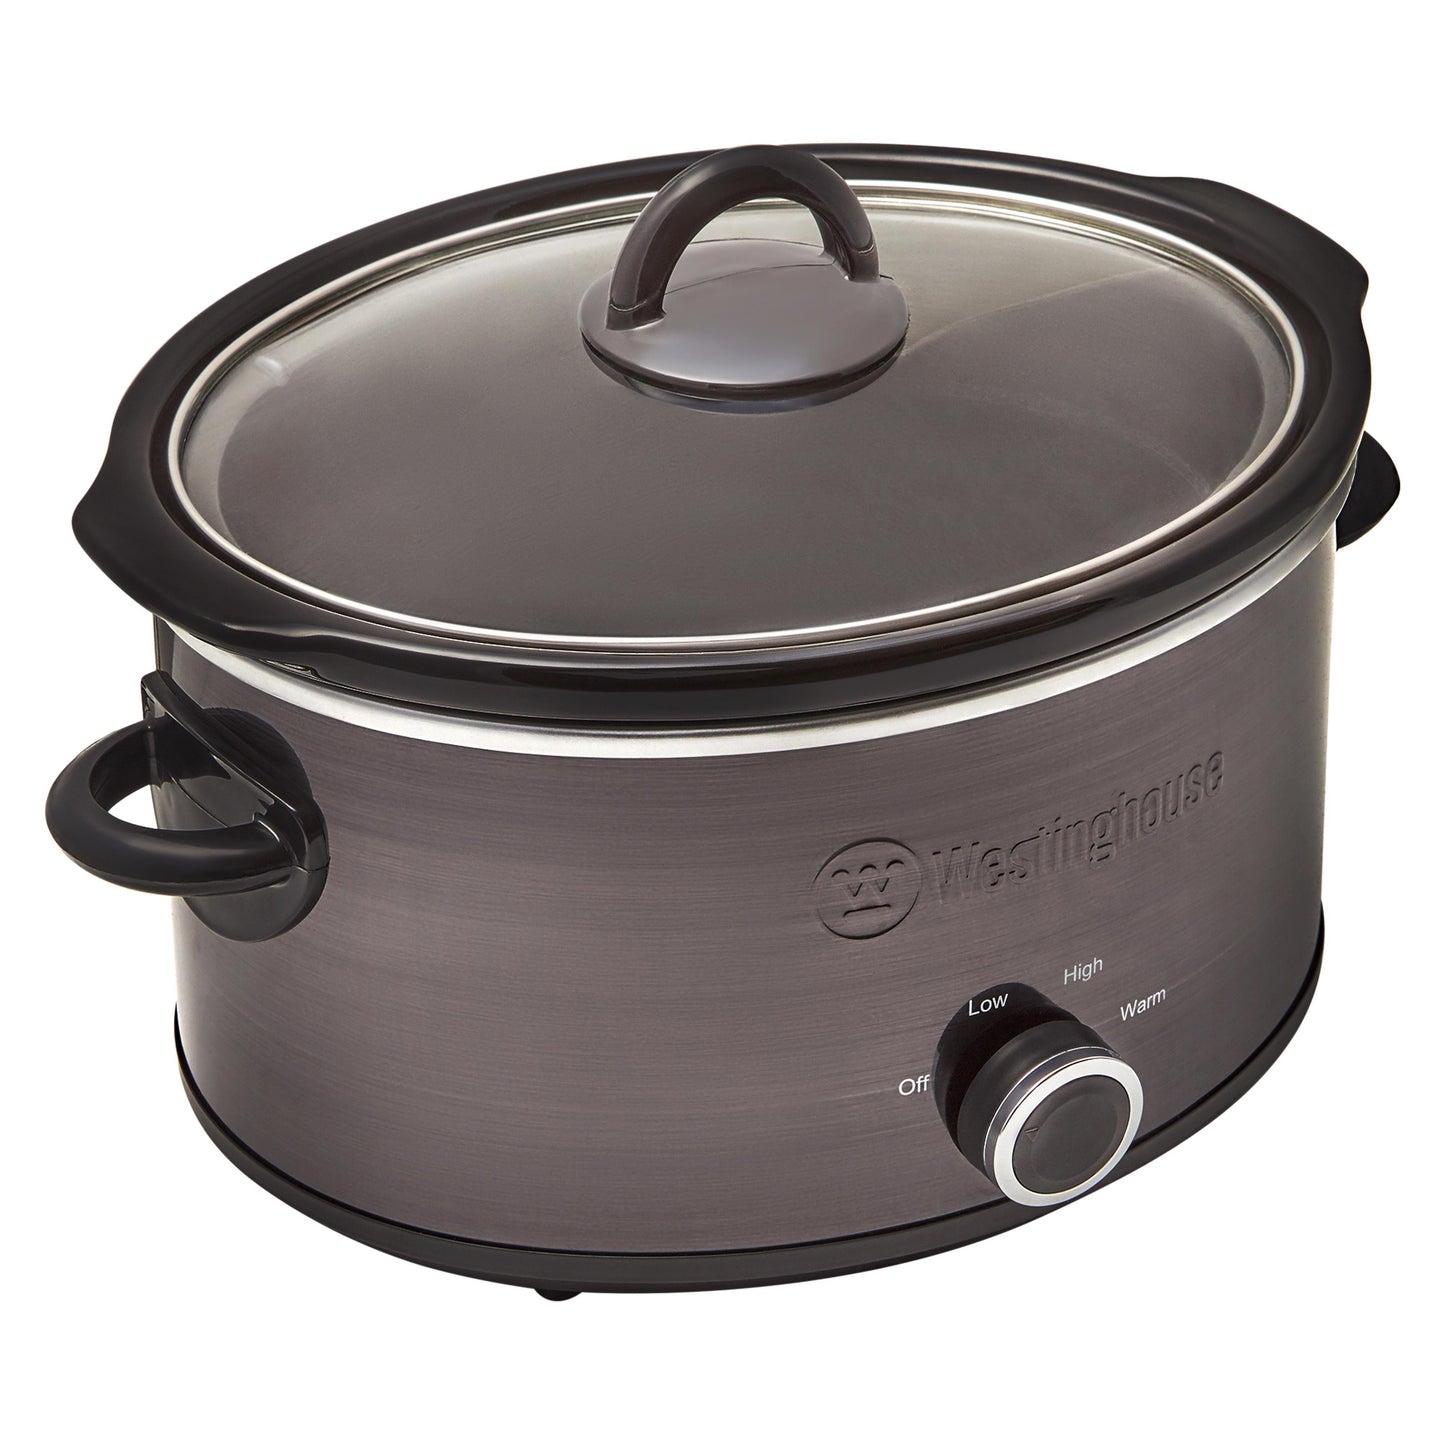 Westinghouse Slow Cooker 3.5L Black Stainless Steel